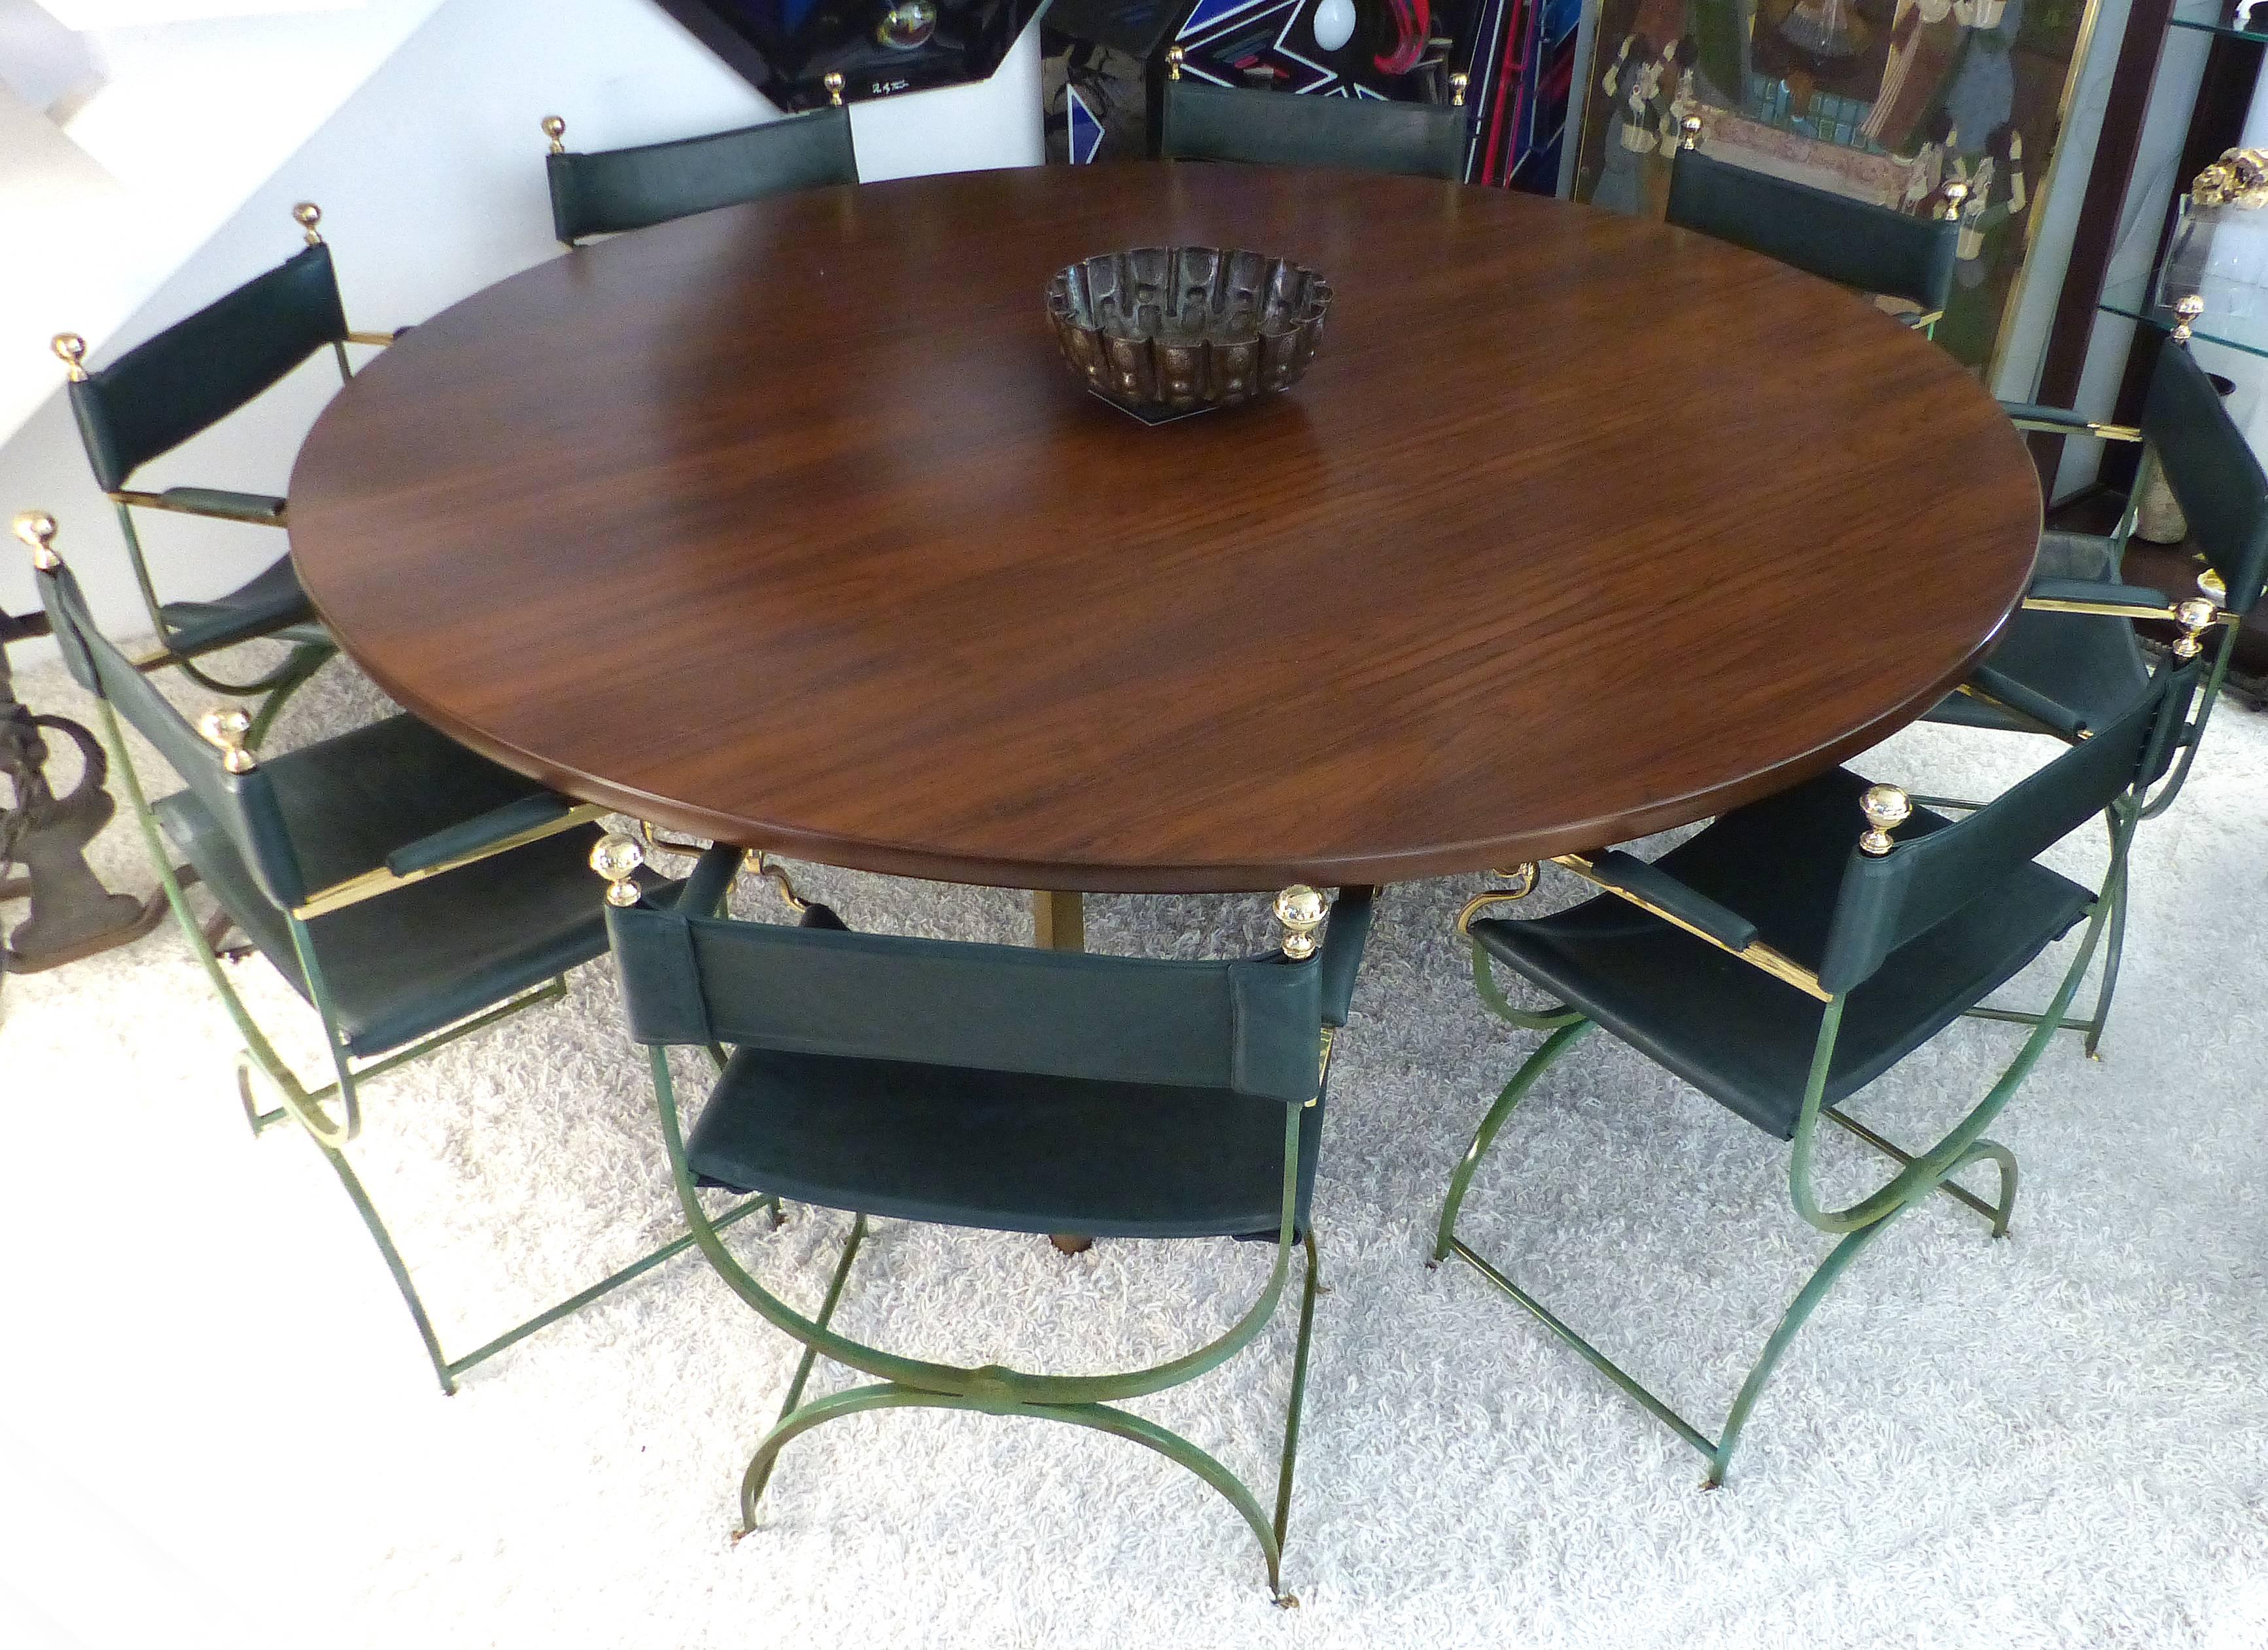 Dunbar Monumental Round Mid-century Rosewood Dining Table 

Offered for sale is a Dunbar matched grain Rosewood round monumental dining table with brass legs. Two matched grain panels are joined in the center of the table and supported by square